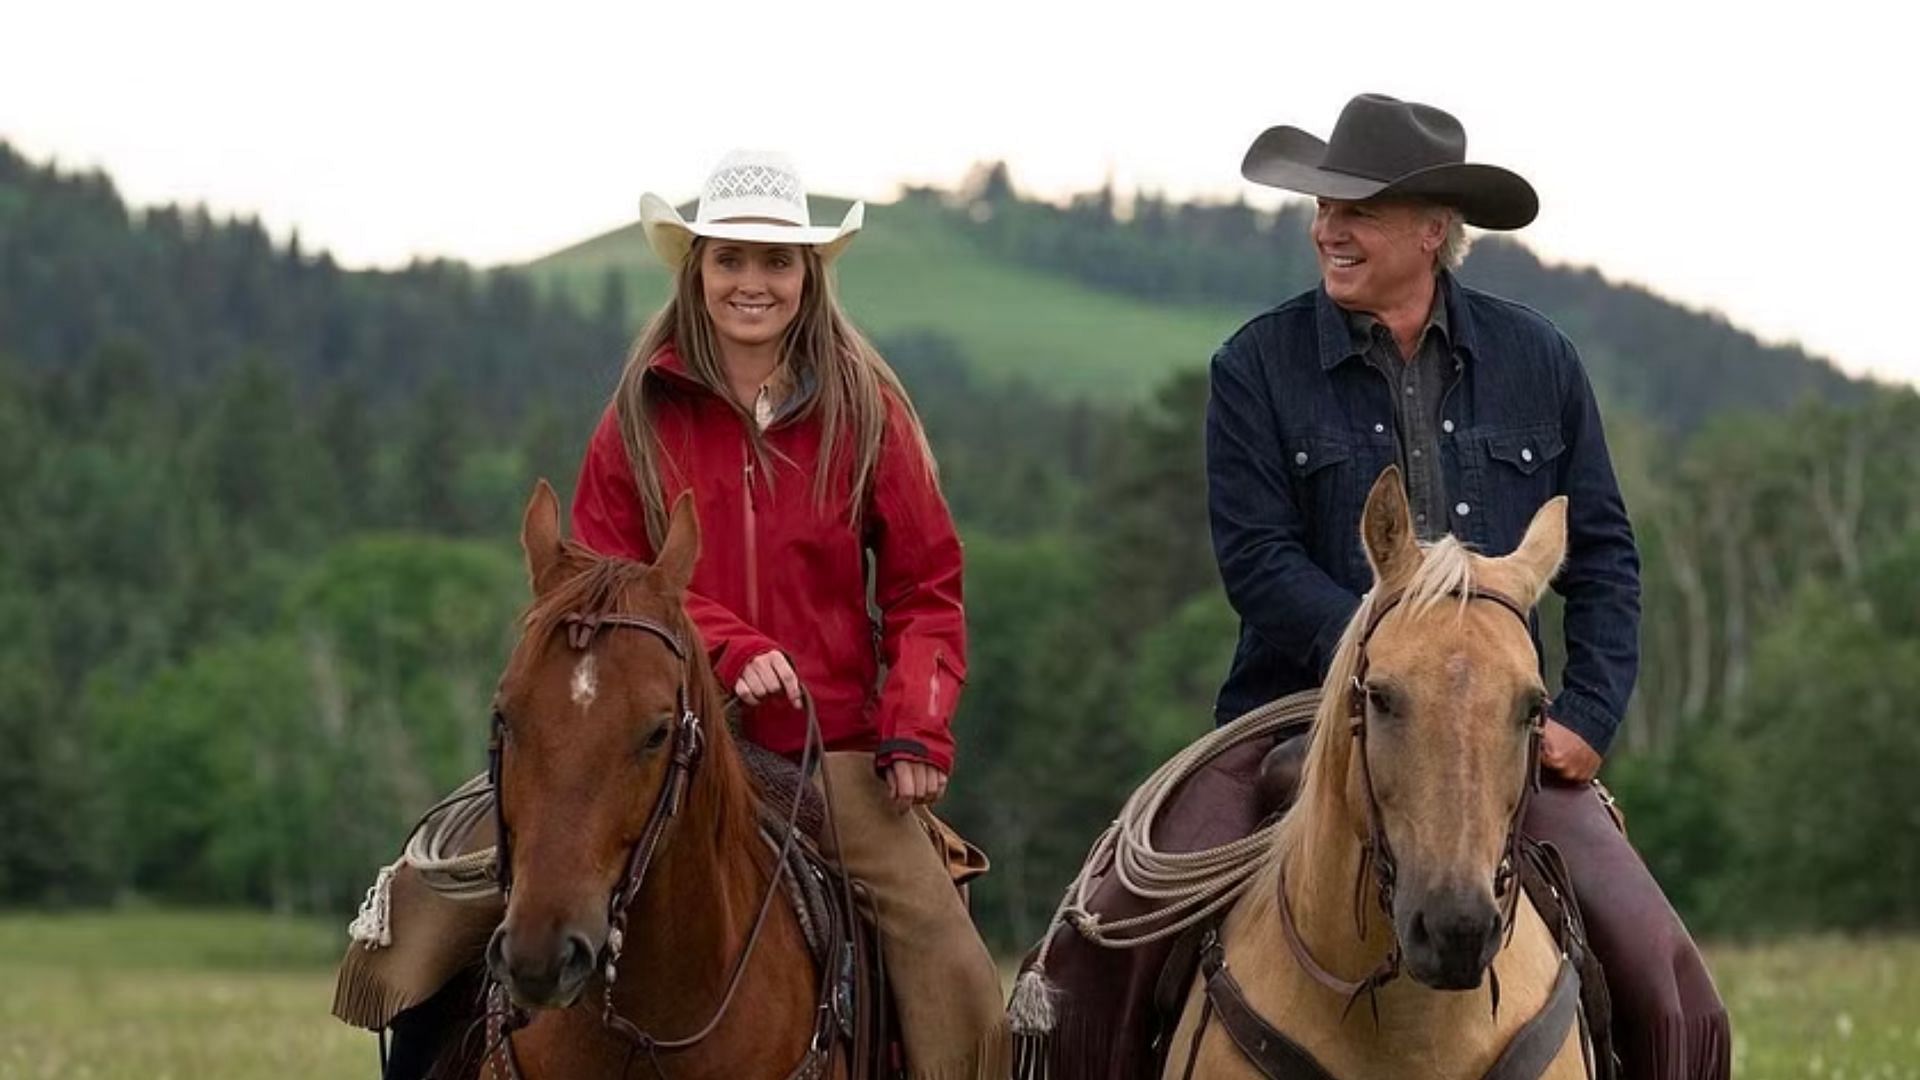 Heartland is one of Canada